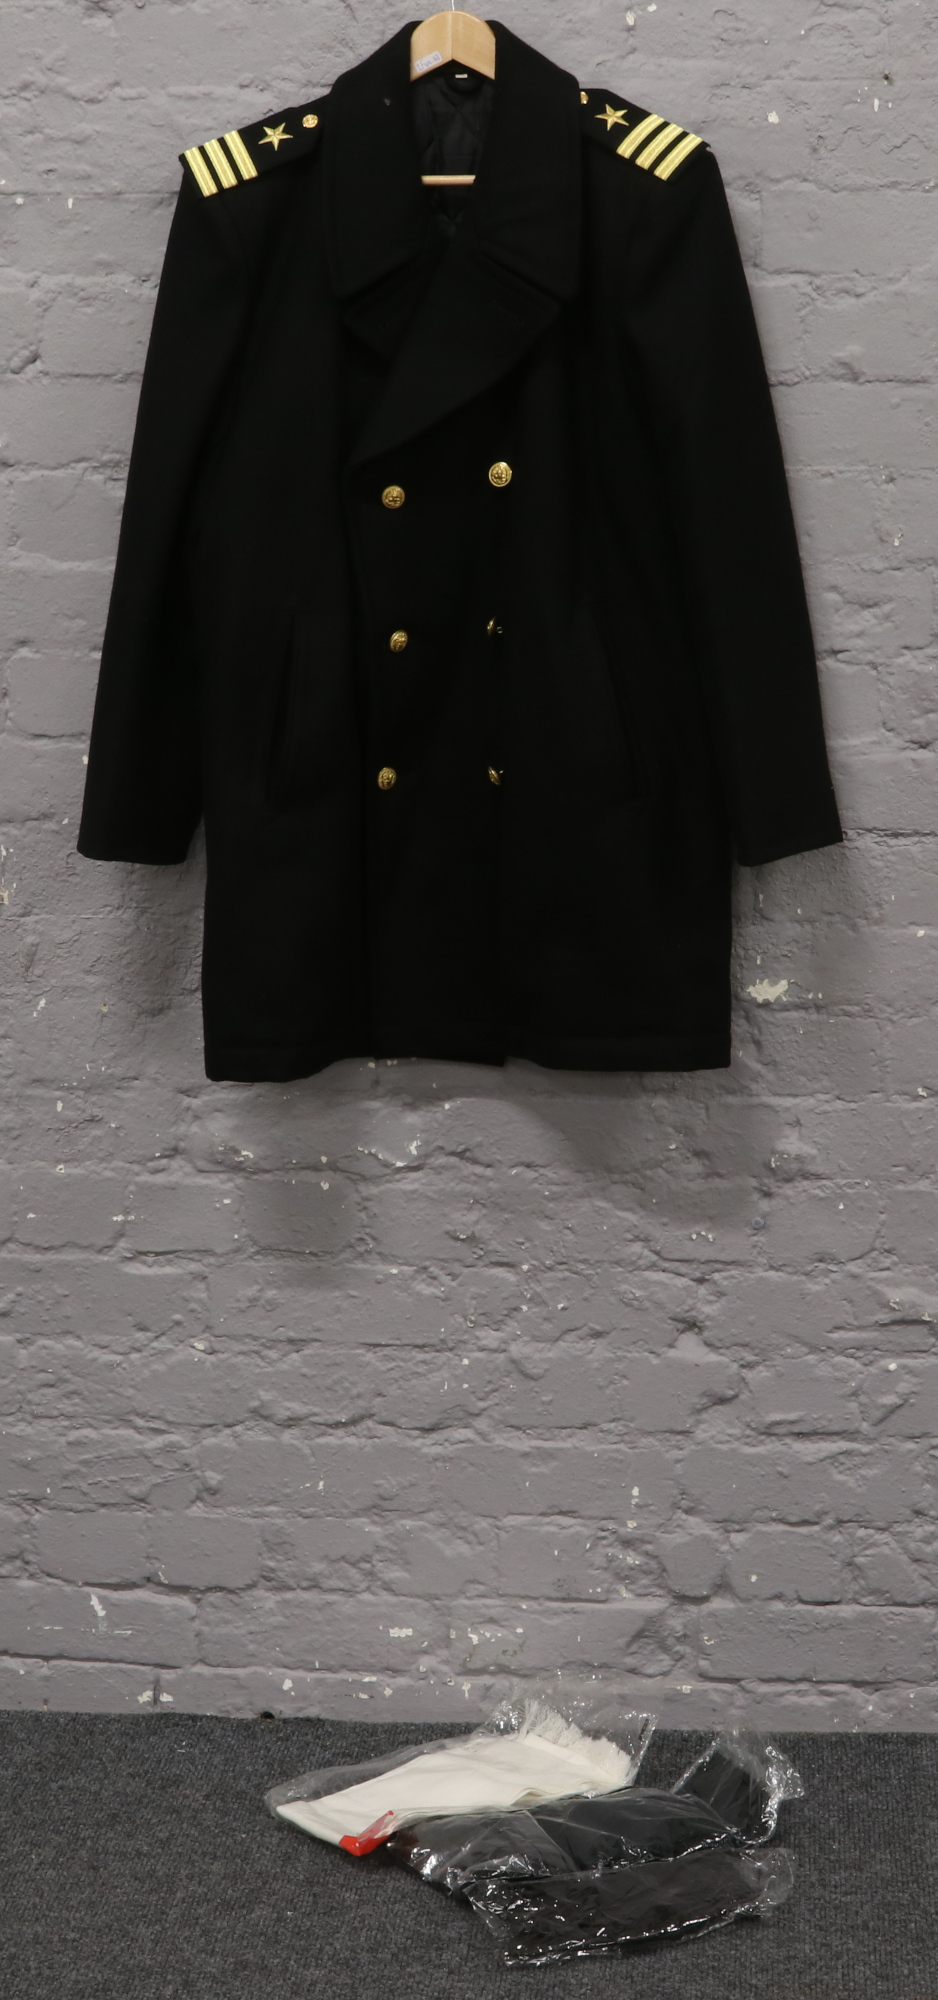 A genuine post World War II dark blue US Navy pea coat, along with two scarfs and a pair of black